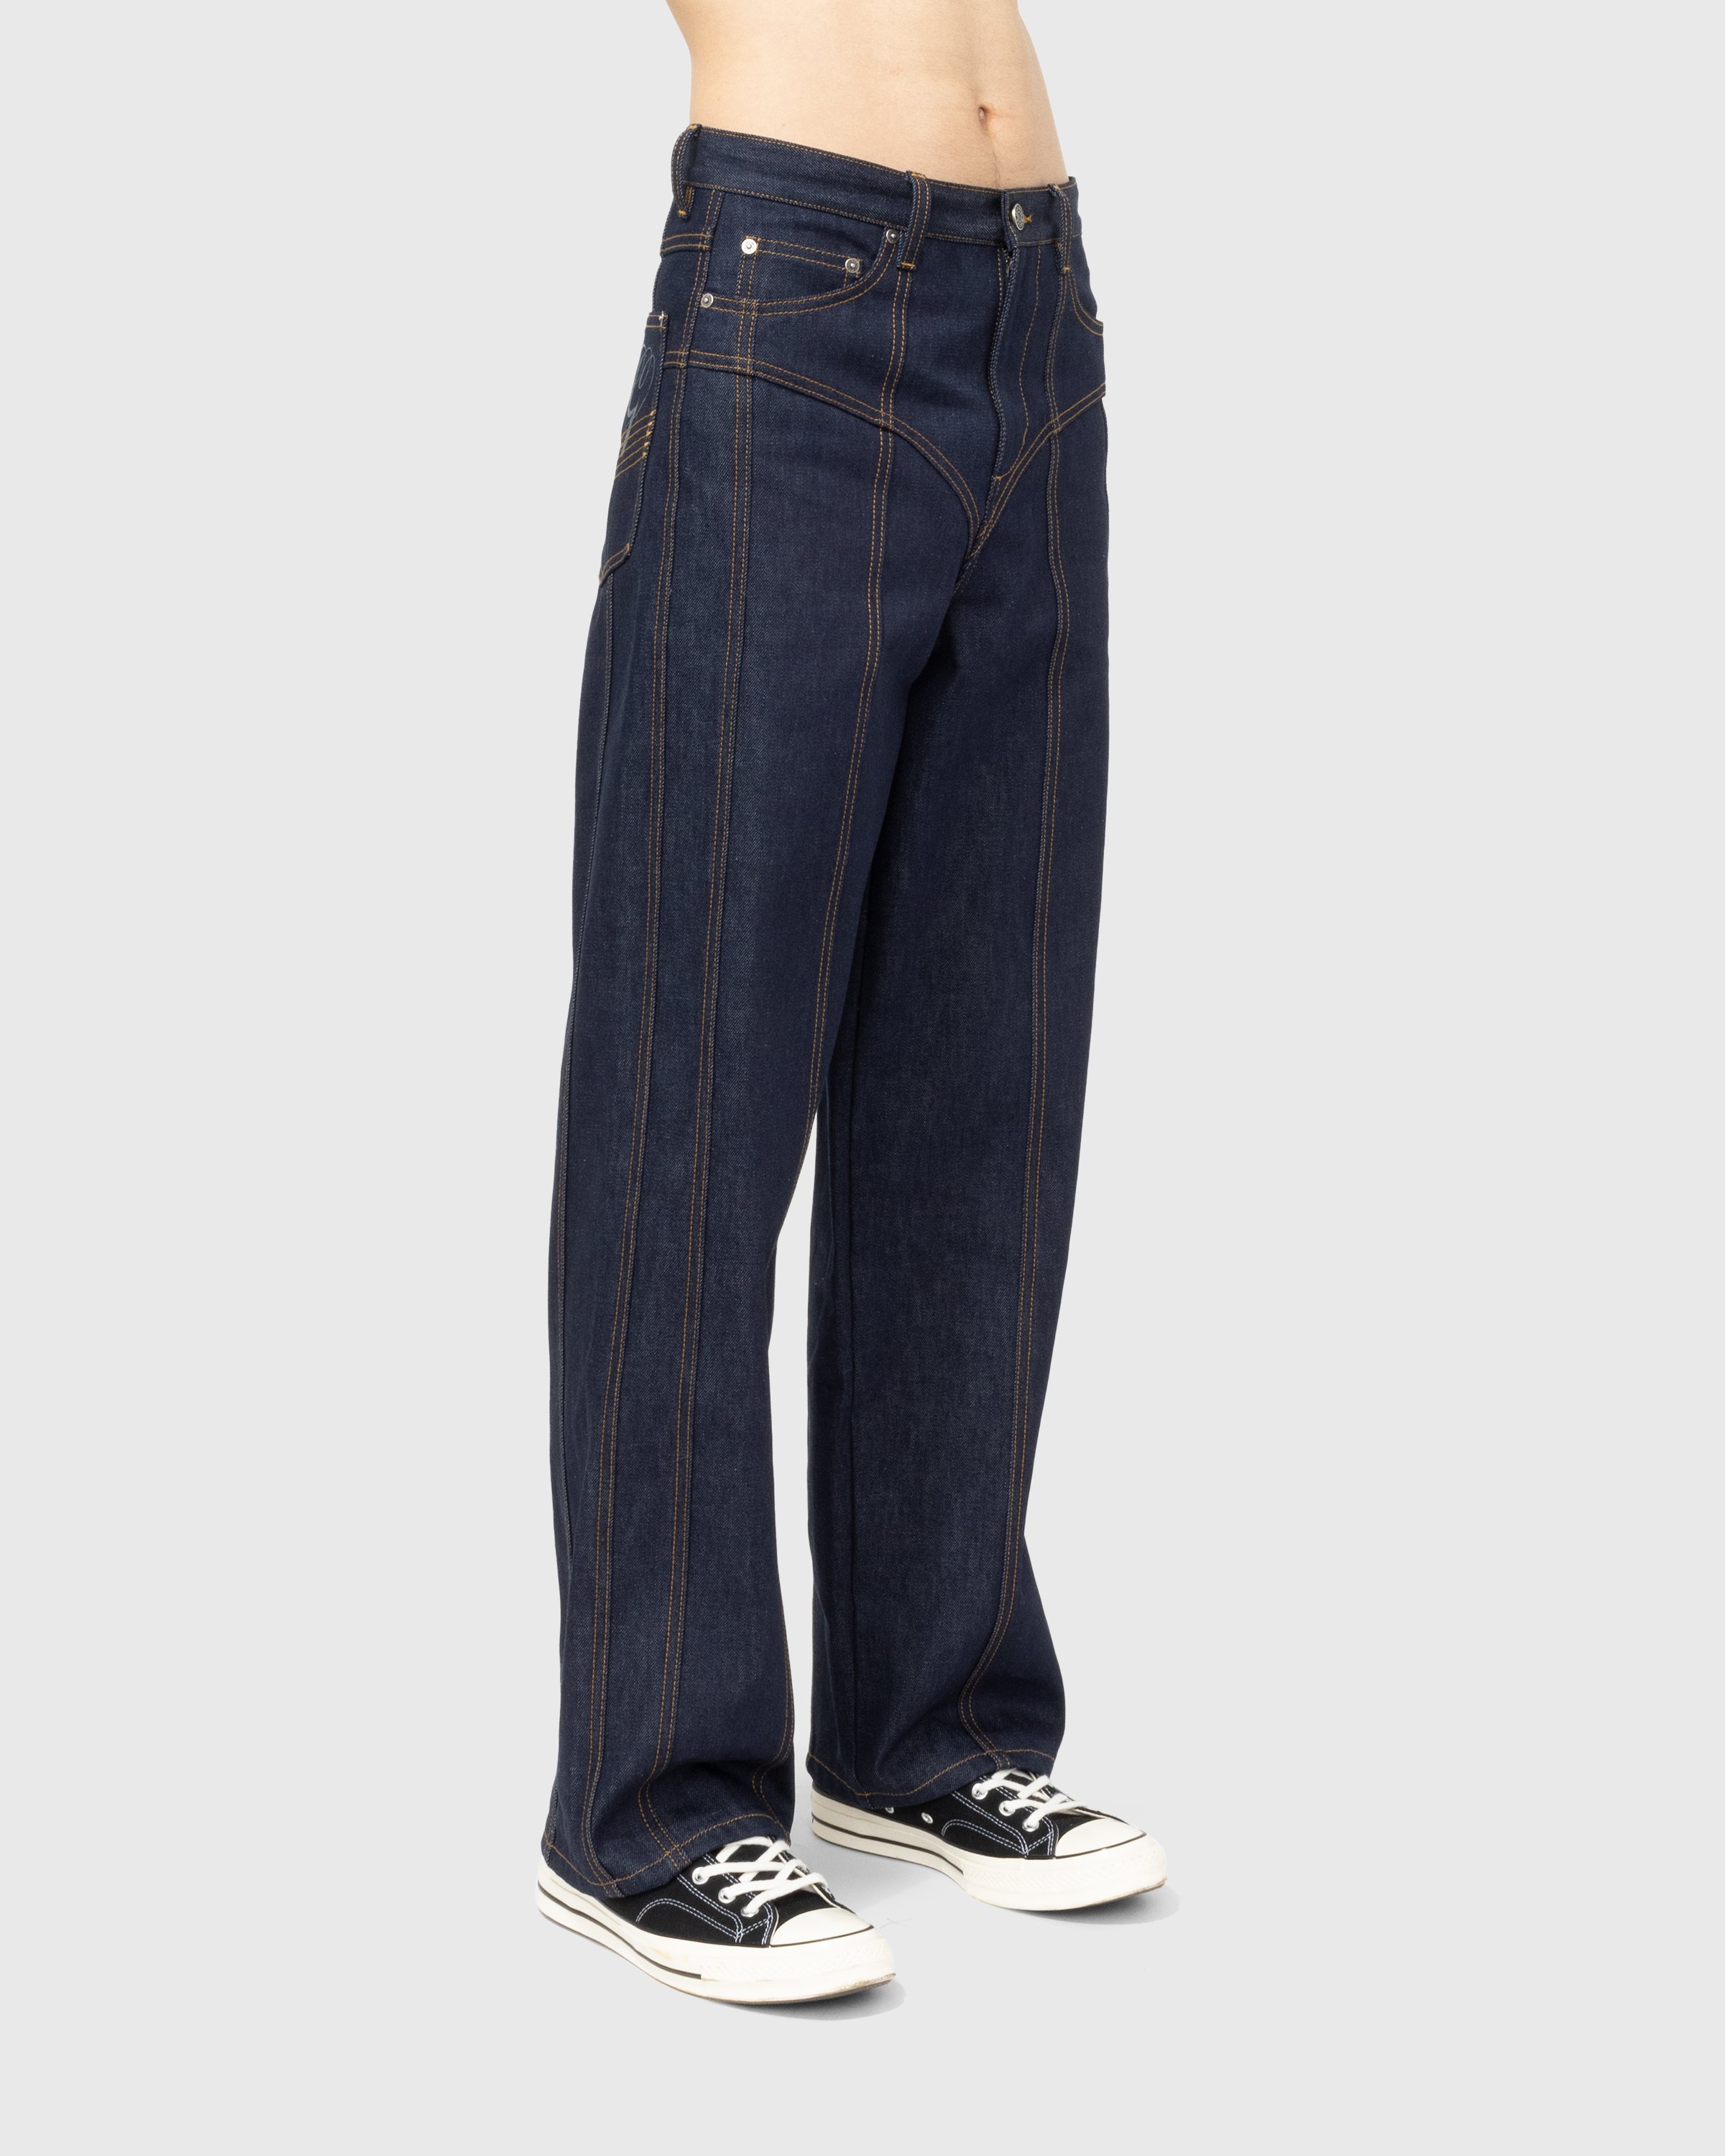 Jean Paul Gaultier - Raw Low-Rise Jeans Indigo - Clothing - Blue - Image 2